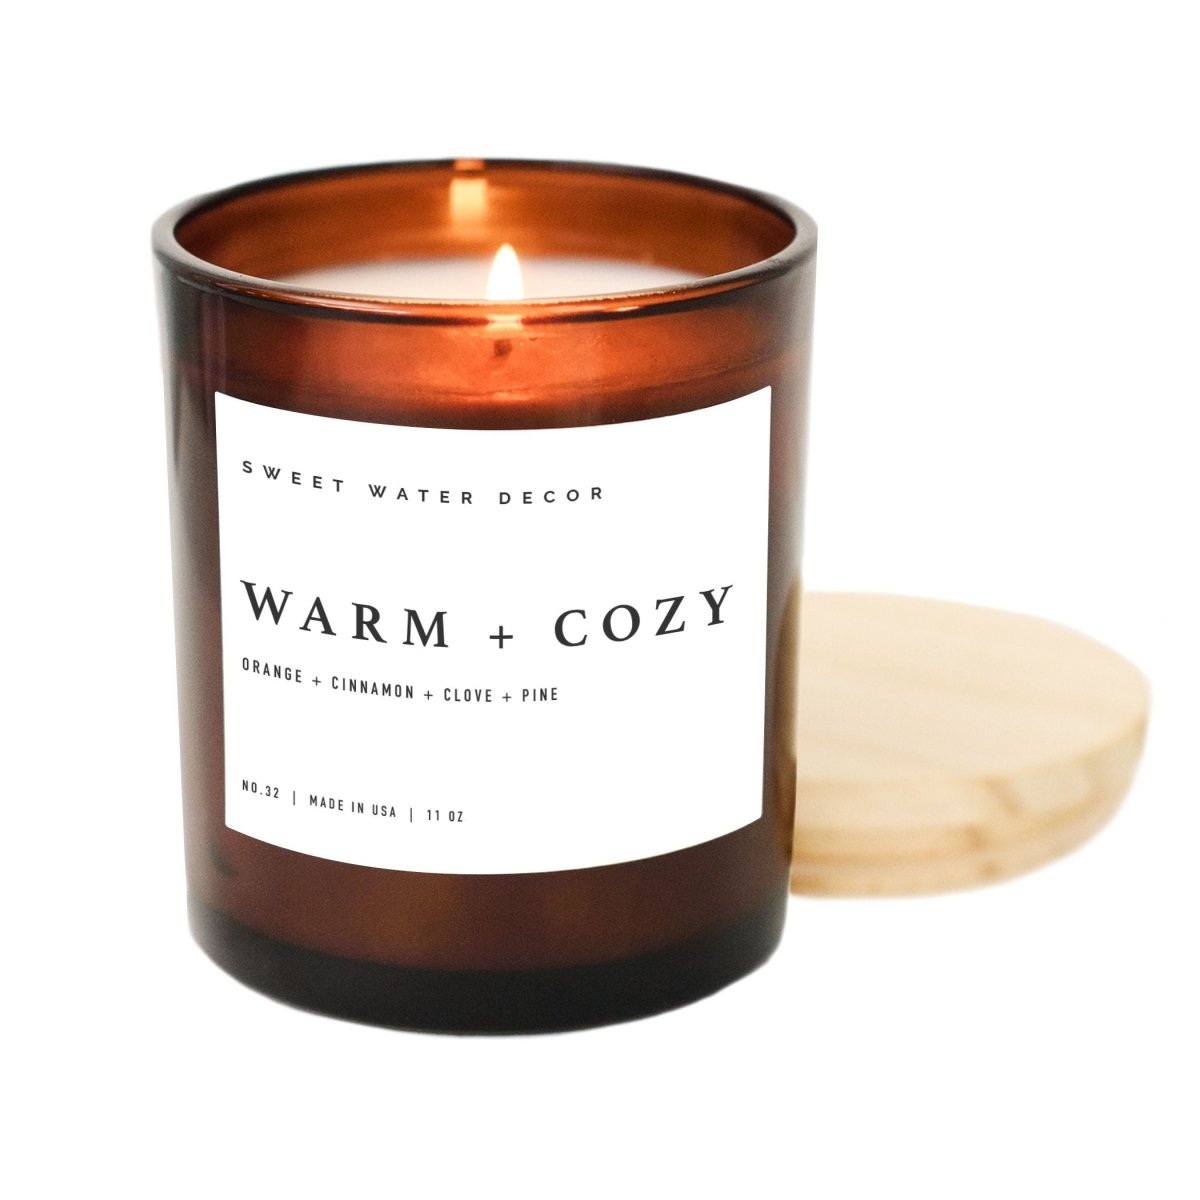 Sweet Water Decor Warm and Cozy Soy Candle - Amber Jar - 11 oz - lily & onyx